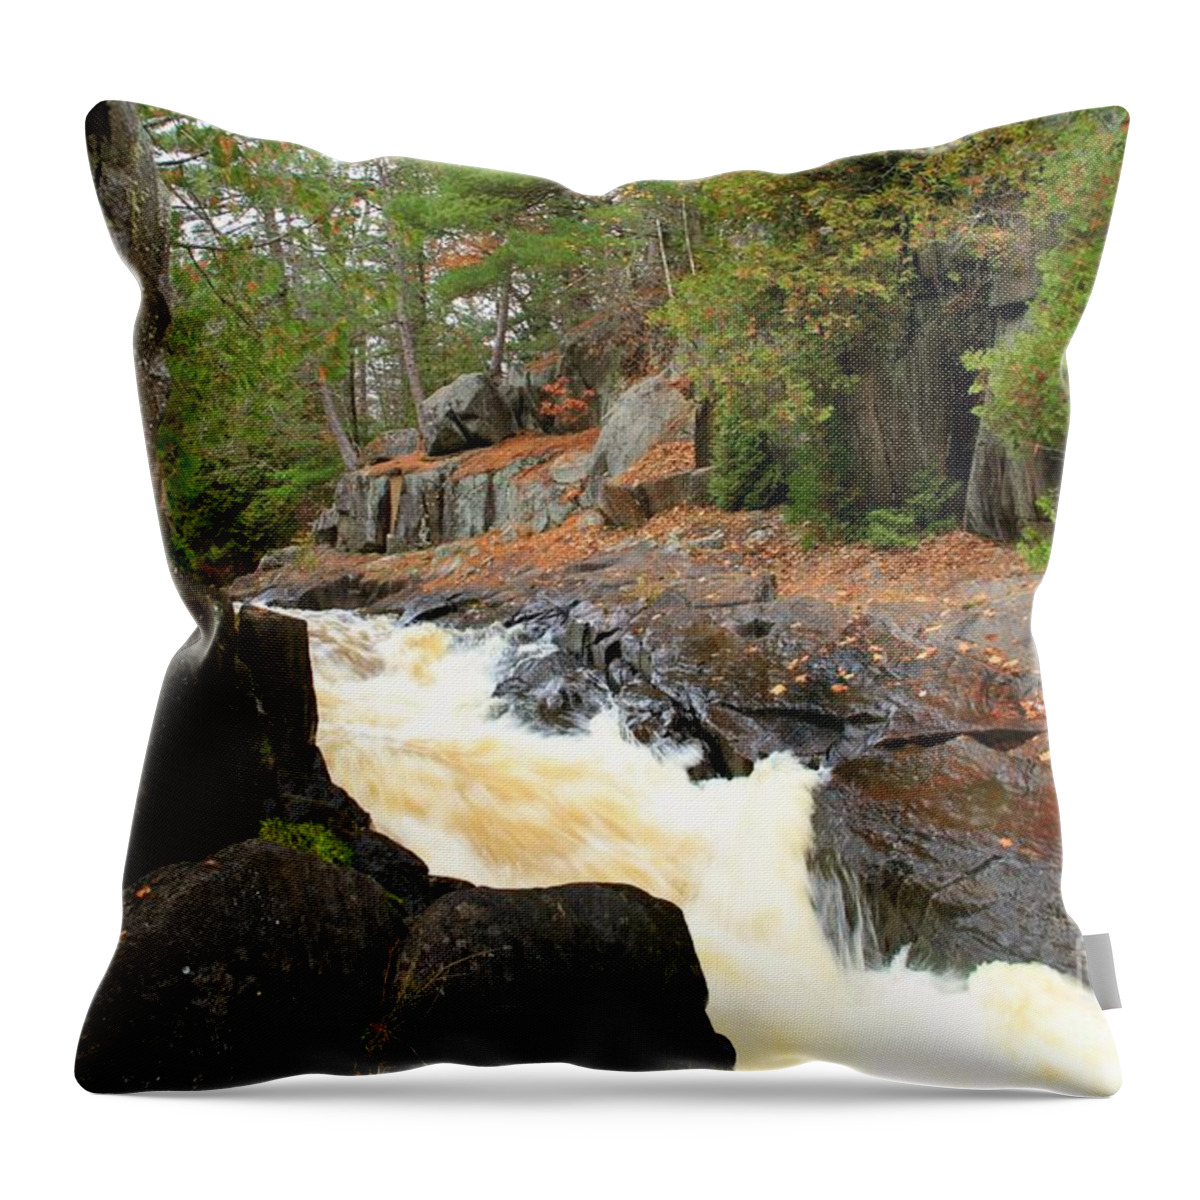 Waterfalls Throw Pillow featuring the photograph Dave's Falls #7311 by Mark J Seefeldt